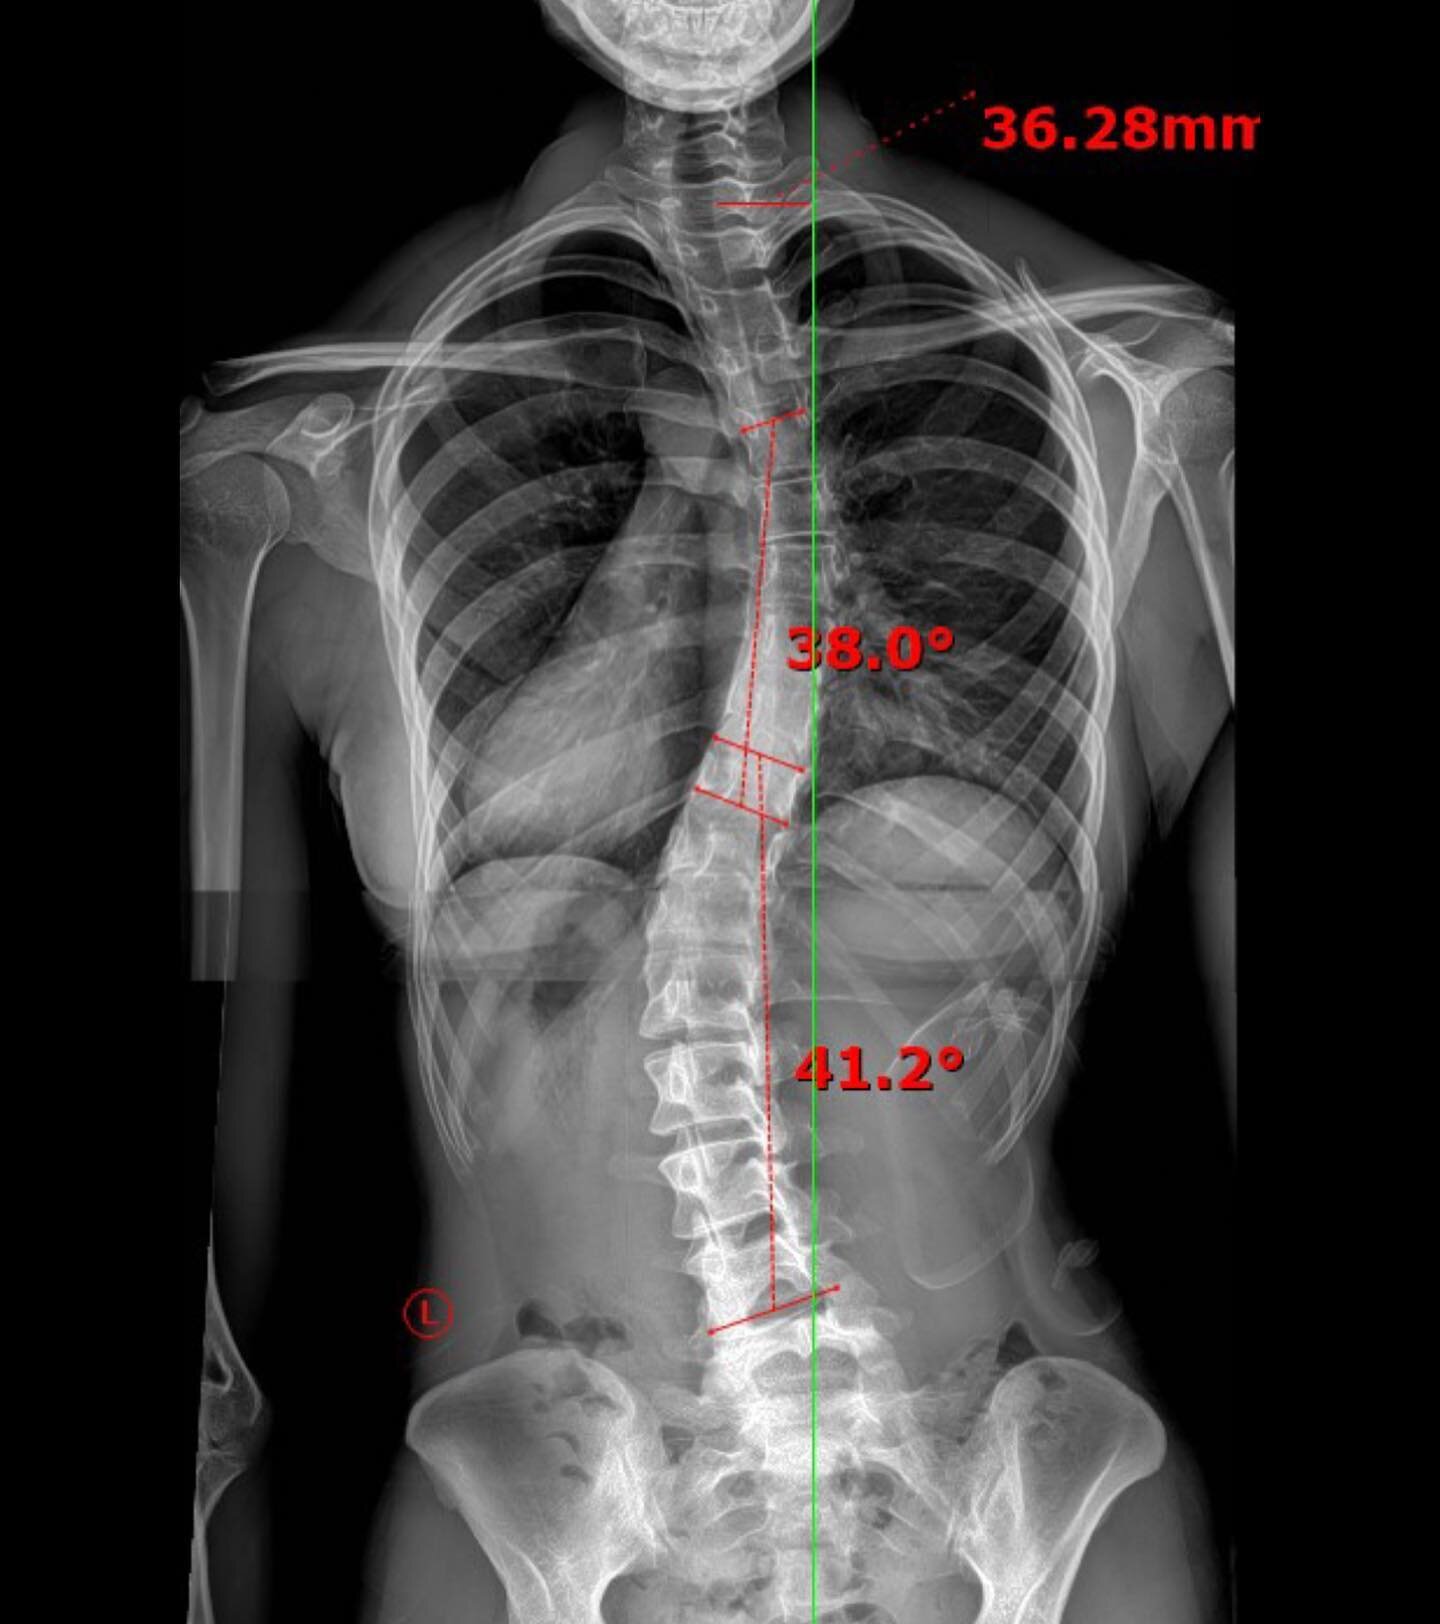 Check out one of our recent scoliosis patients! 

This patient was diagnosed with scoliosis at 13 and was recommended surgery to straighten the curve. 10 years later after refusing the surgery, and she started to have symptoms. The first x-ray is at 